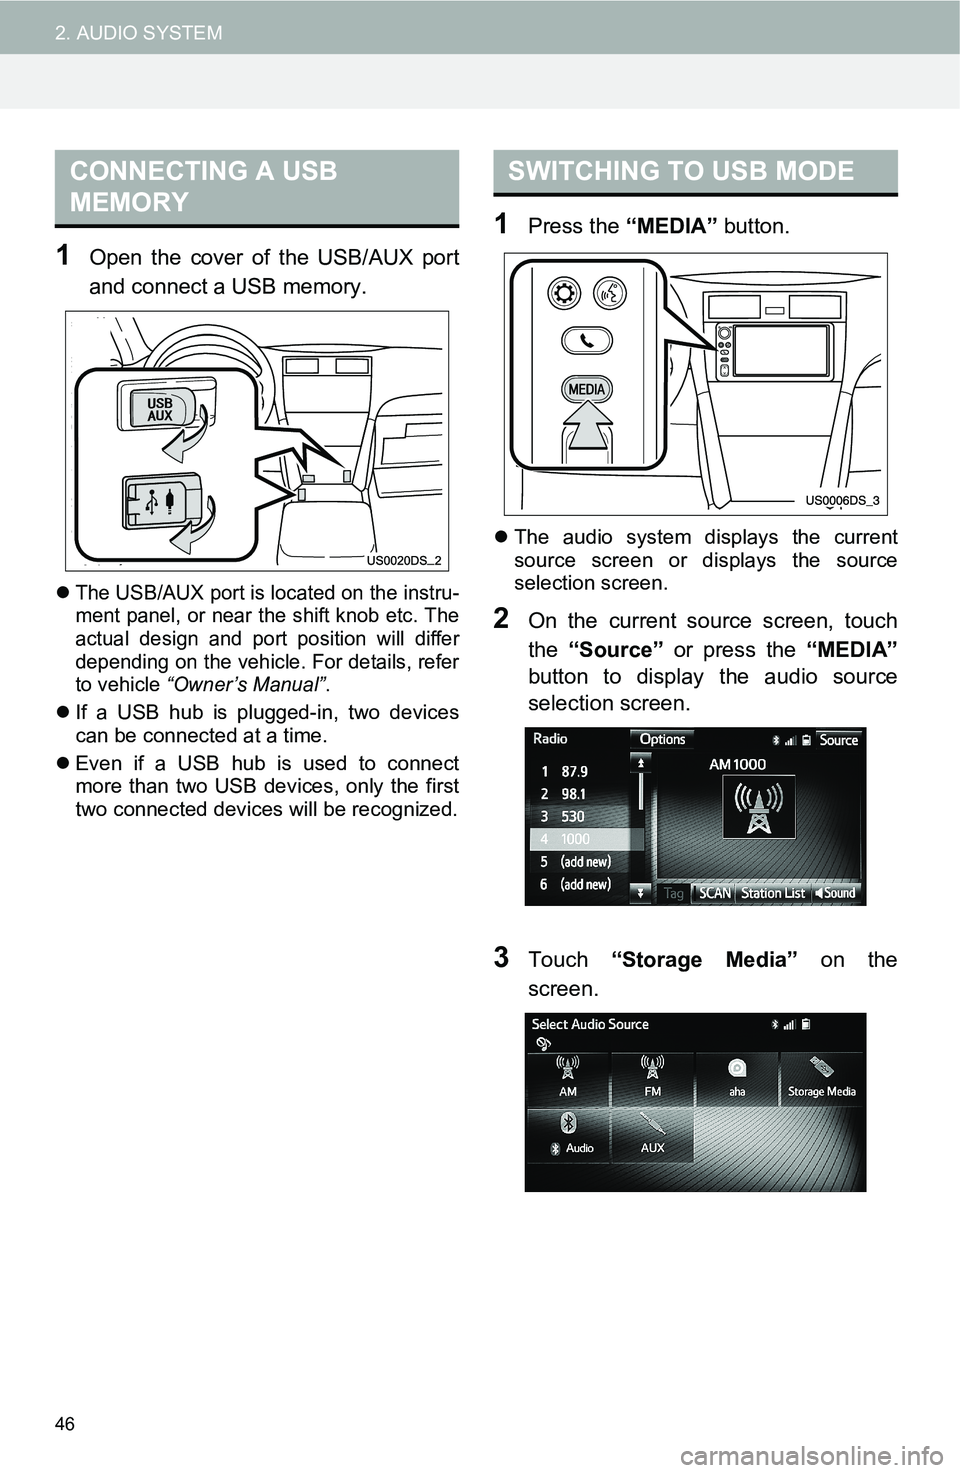 TOYOTA FR-S 2016  Accessories, Audio & Navigation (in English) 46
2. AUDIO SYSTEM
1Open the cover of the USB/AUX port
and connect a USB memory.
The USB/AUX port is located on the instru-
ment panel, or near the shift knob etc. The
actual design and port positi